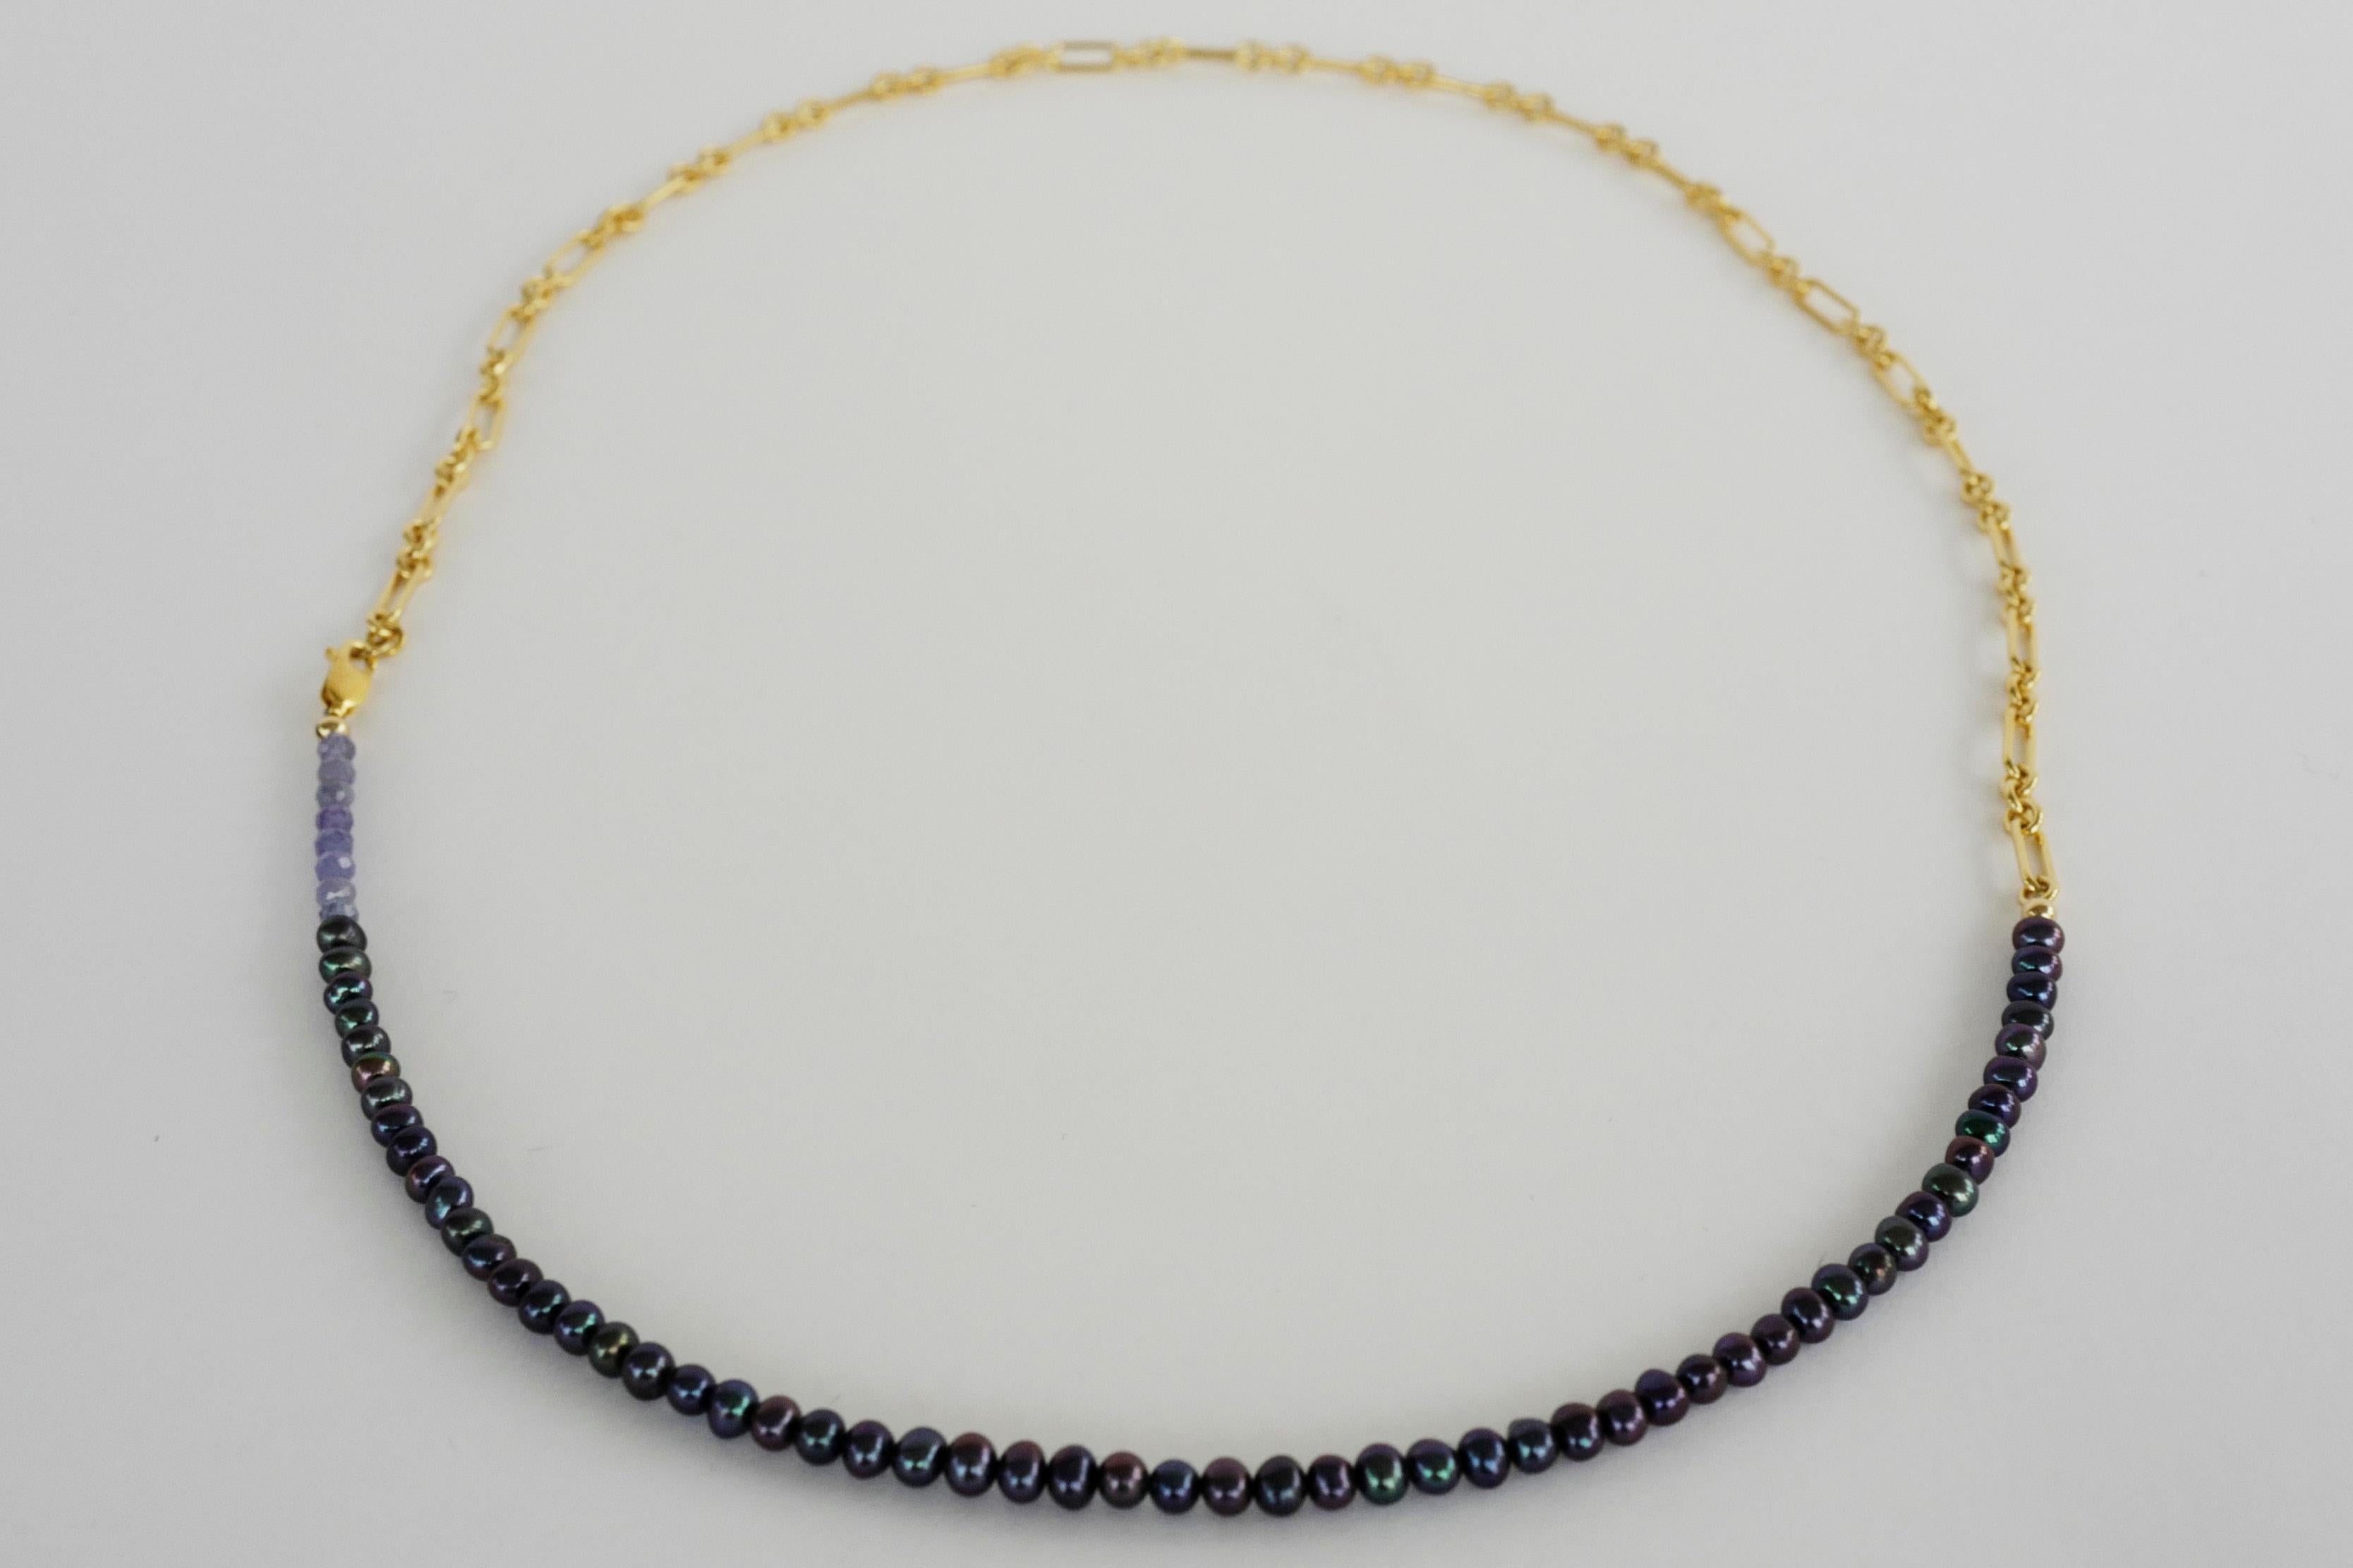 Women's Tanzanite Black Pearl Gold Filled Chain Beaded Choker Necklace For Sale